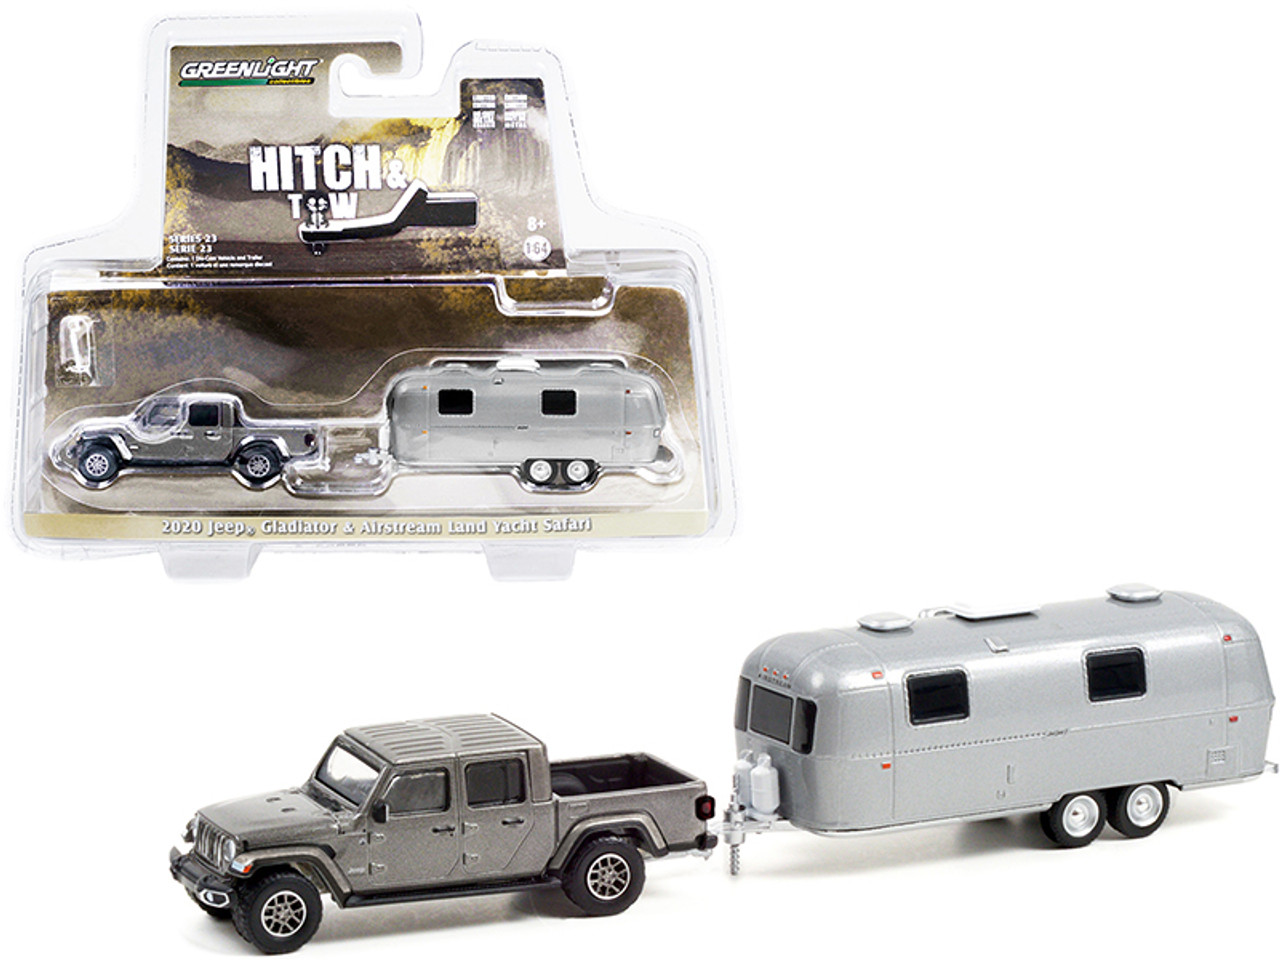 2020 Jeep Gladiator Pickup Truck Granite Crystal Gray Metallic with Airstream Land Yacht Safari Travel Trailer "Hitch & Tow" Series 23 1/64 Diecast Model Car by Greenlight